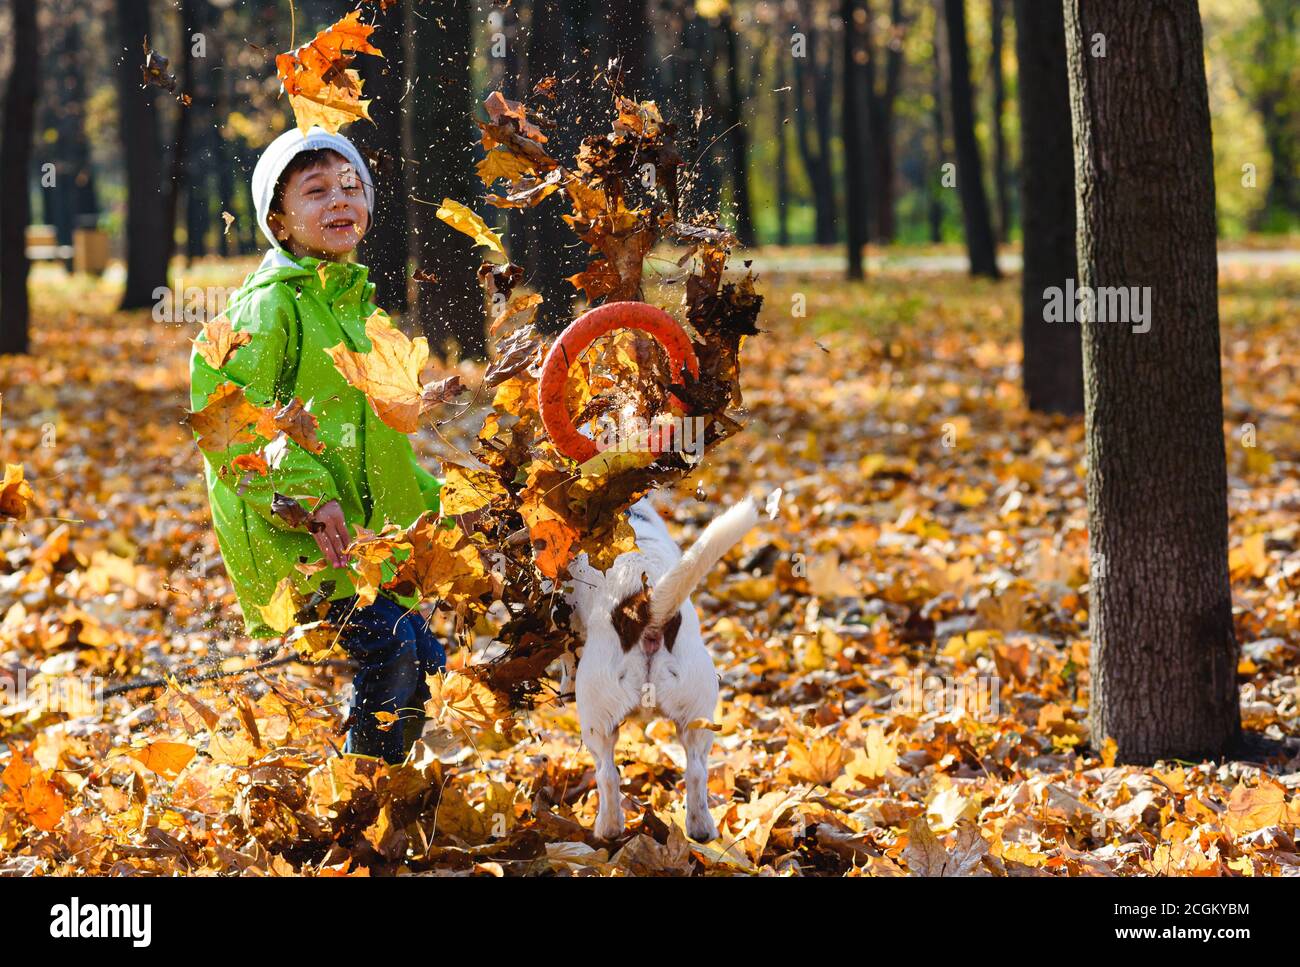 Two happy friends, dog and his young owner, playing in autumn fallen leaves on sunny fall day Stock Photo